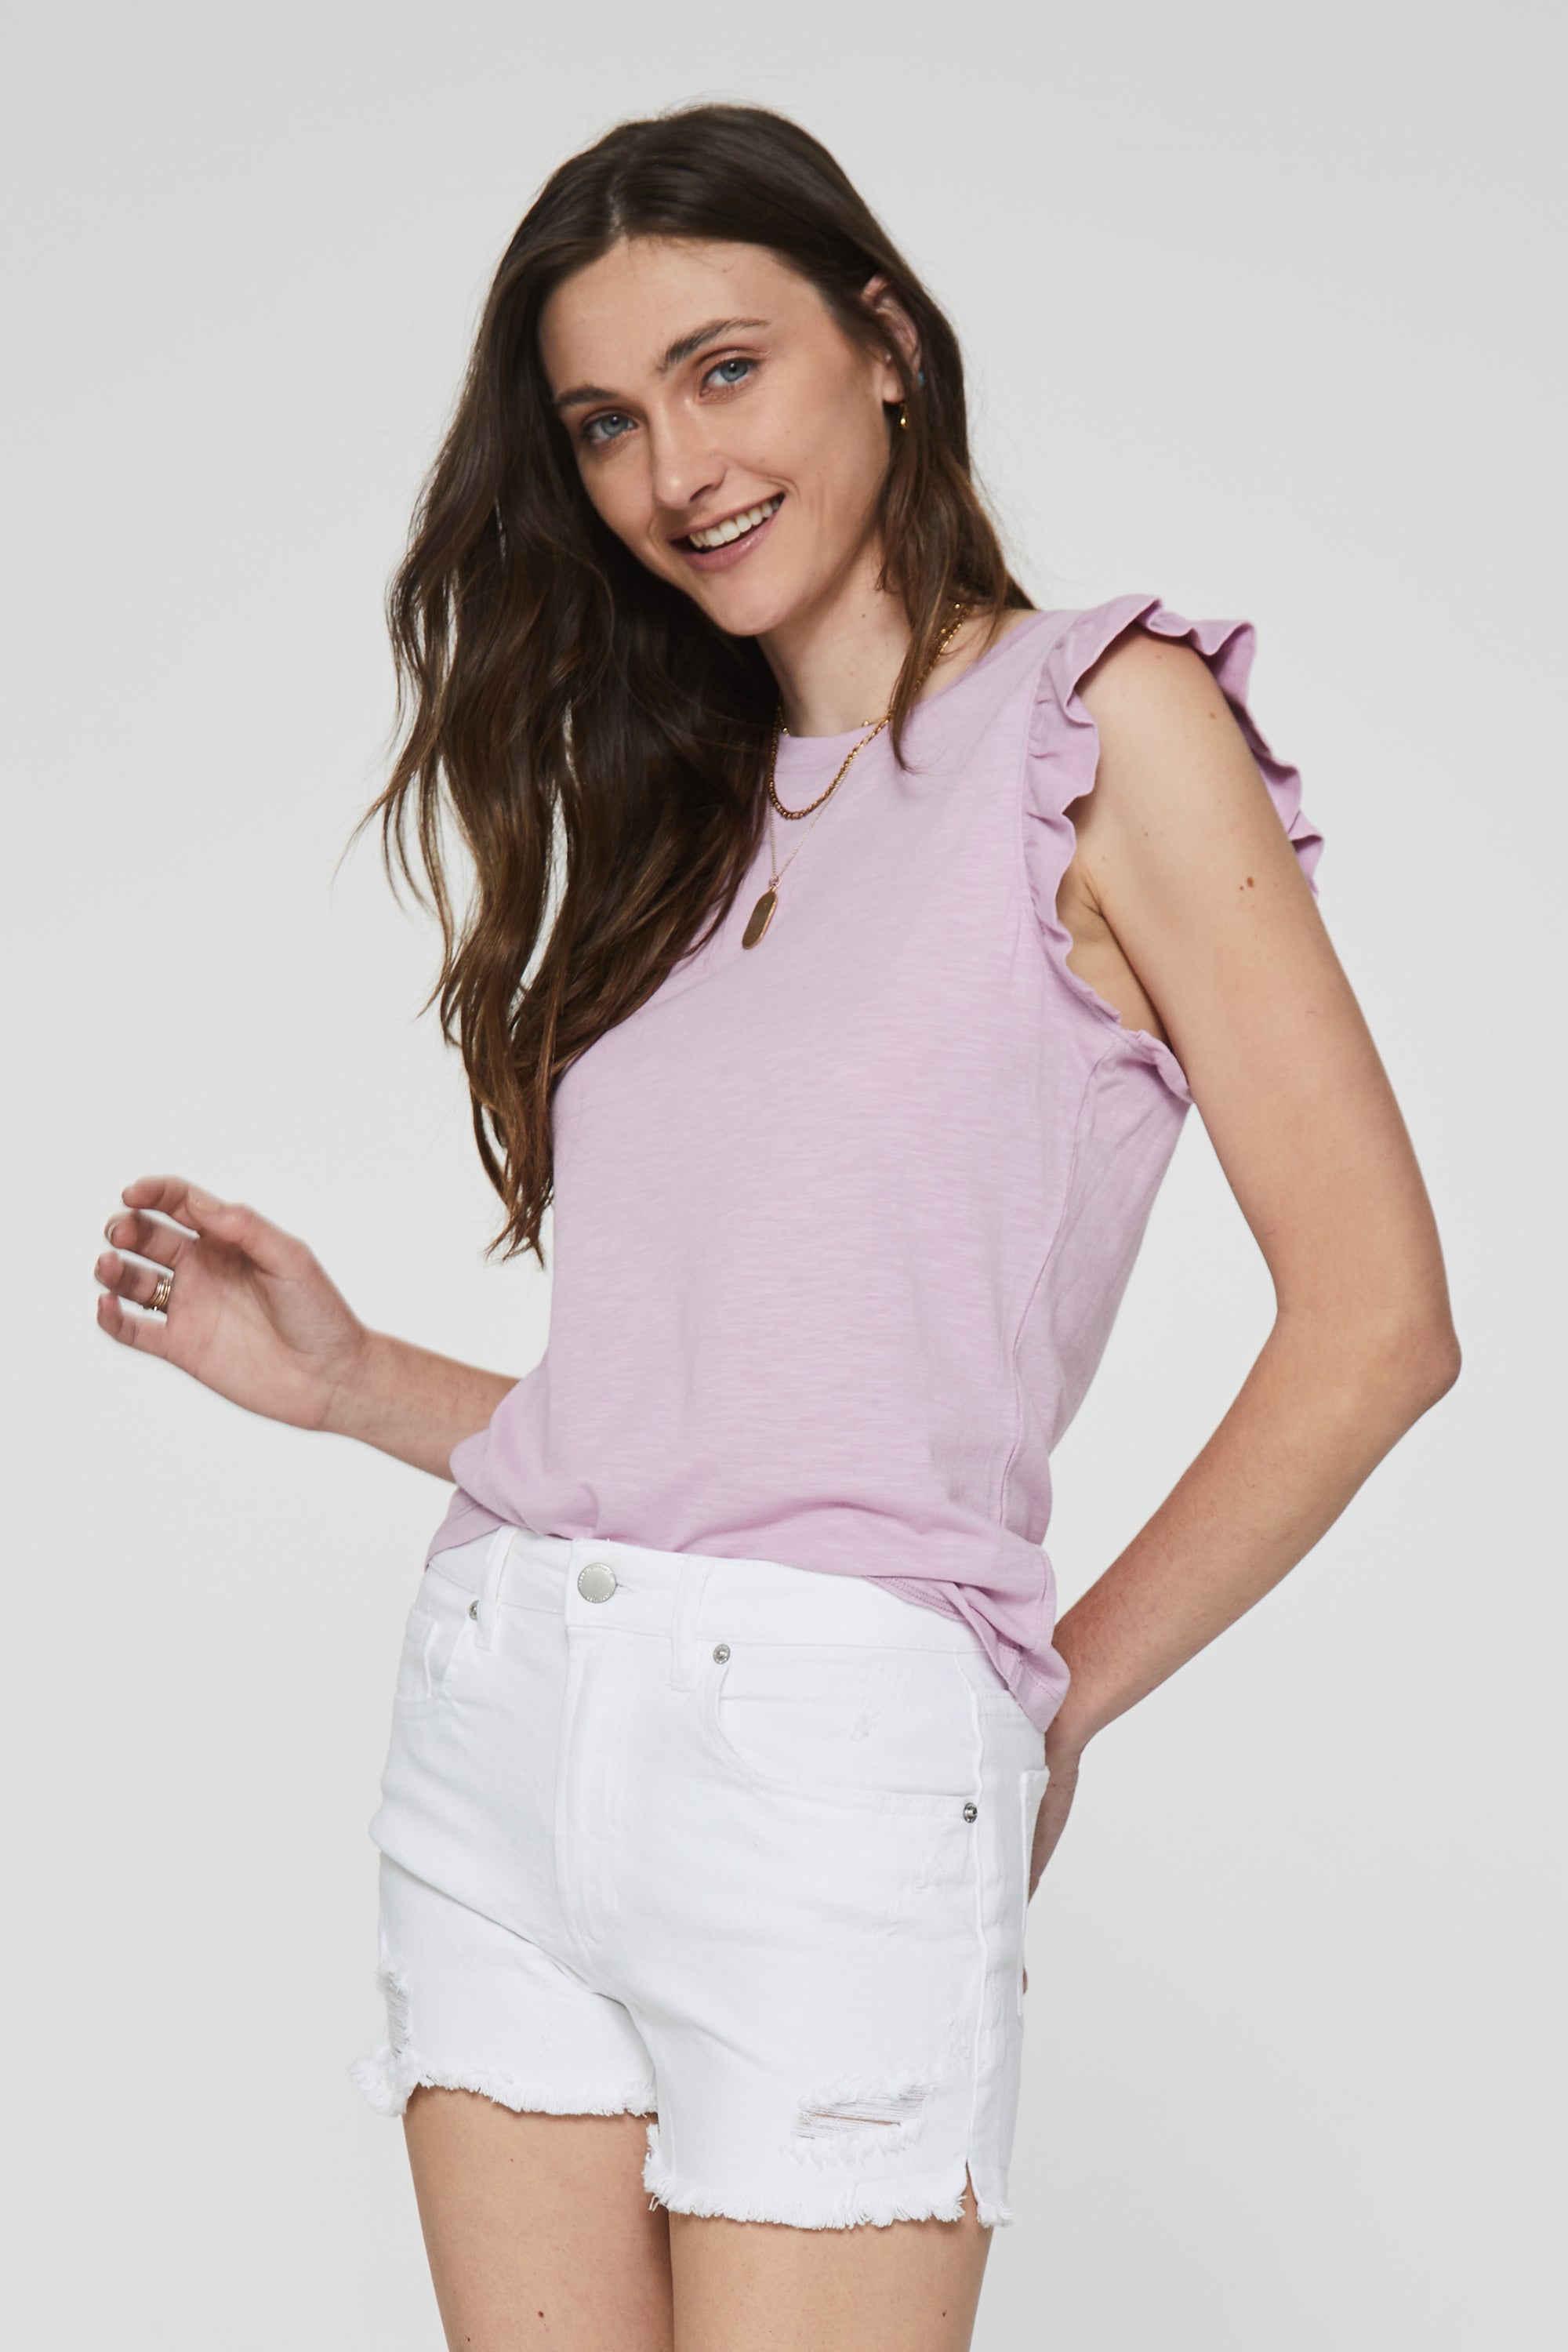 north-ruffle-trimmed-top-verbena-front-image-another-love-clothing